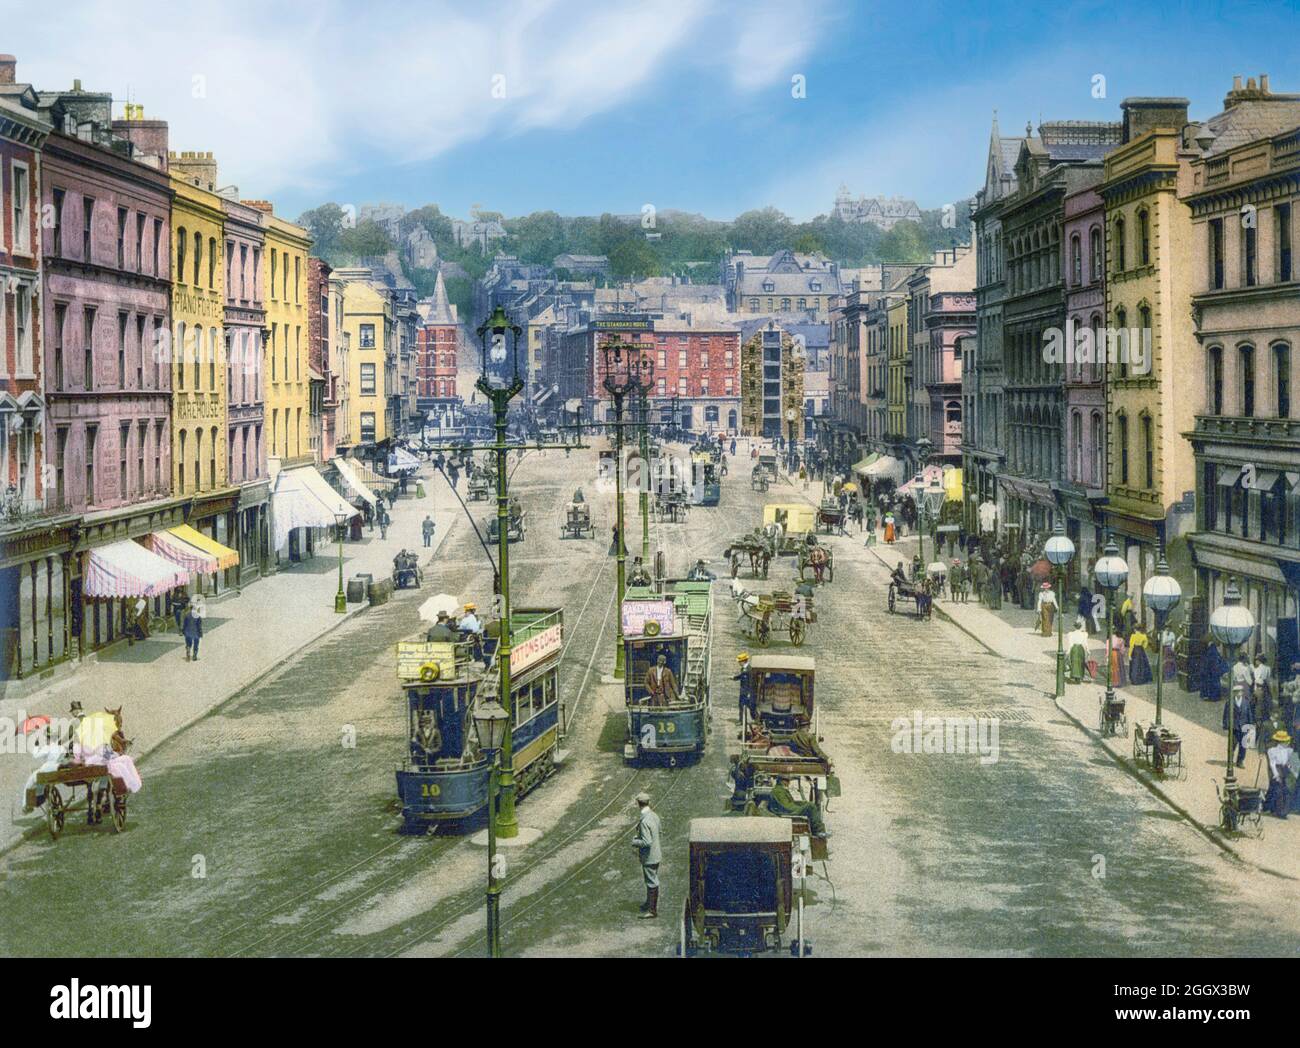 An early 20th century view of St Patrick's Street in Cork City, the second largest city in Ireland. The street dates from the late 18th century, when the city expanded beyond the ancient walls centered on North and South Main Streets. From 1898 to 1931, the street was served by the Cork Electric Tramways and Lighting Company when services started on 22 December 1898. Stock Photo